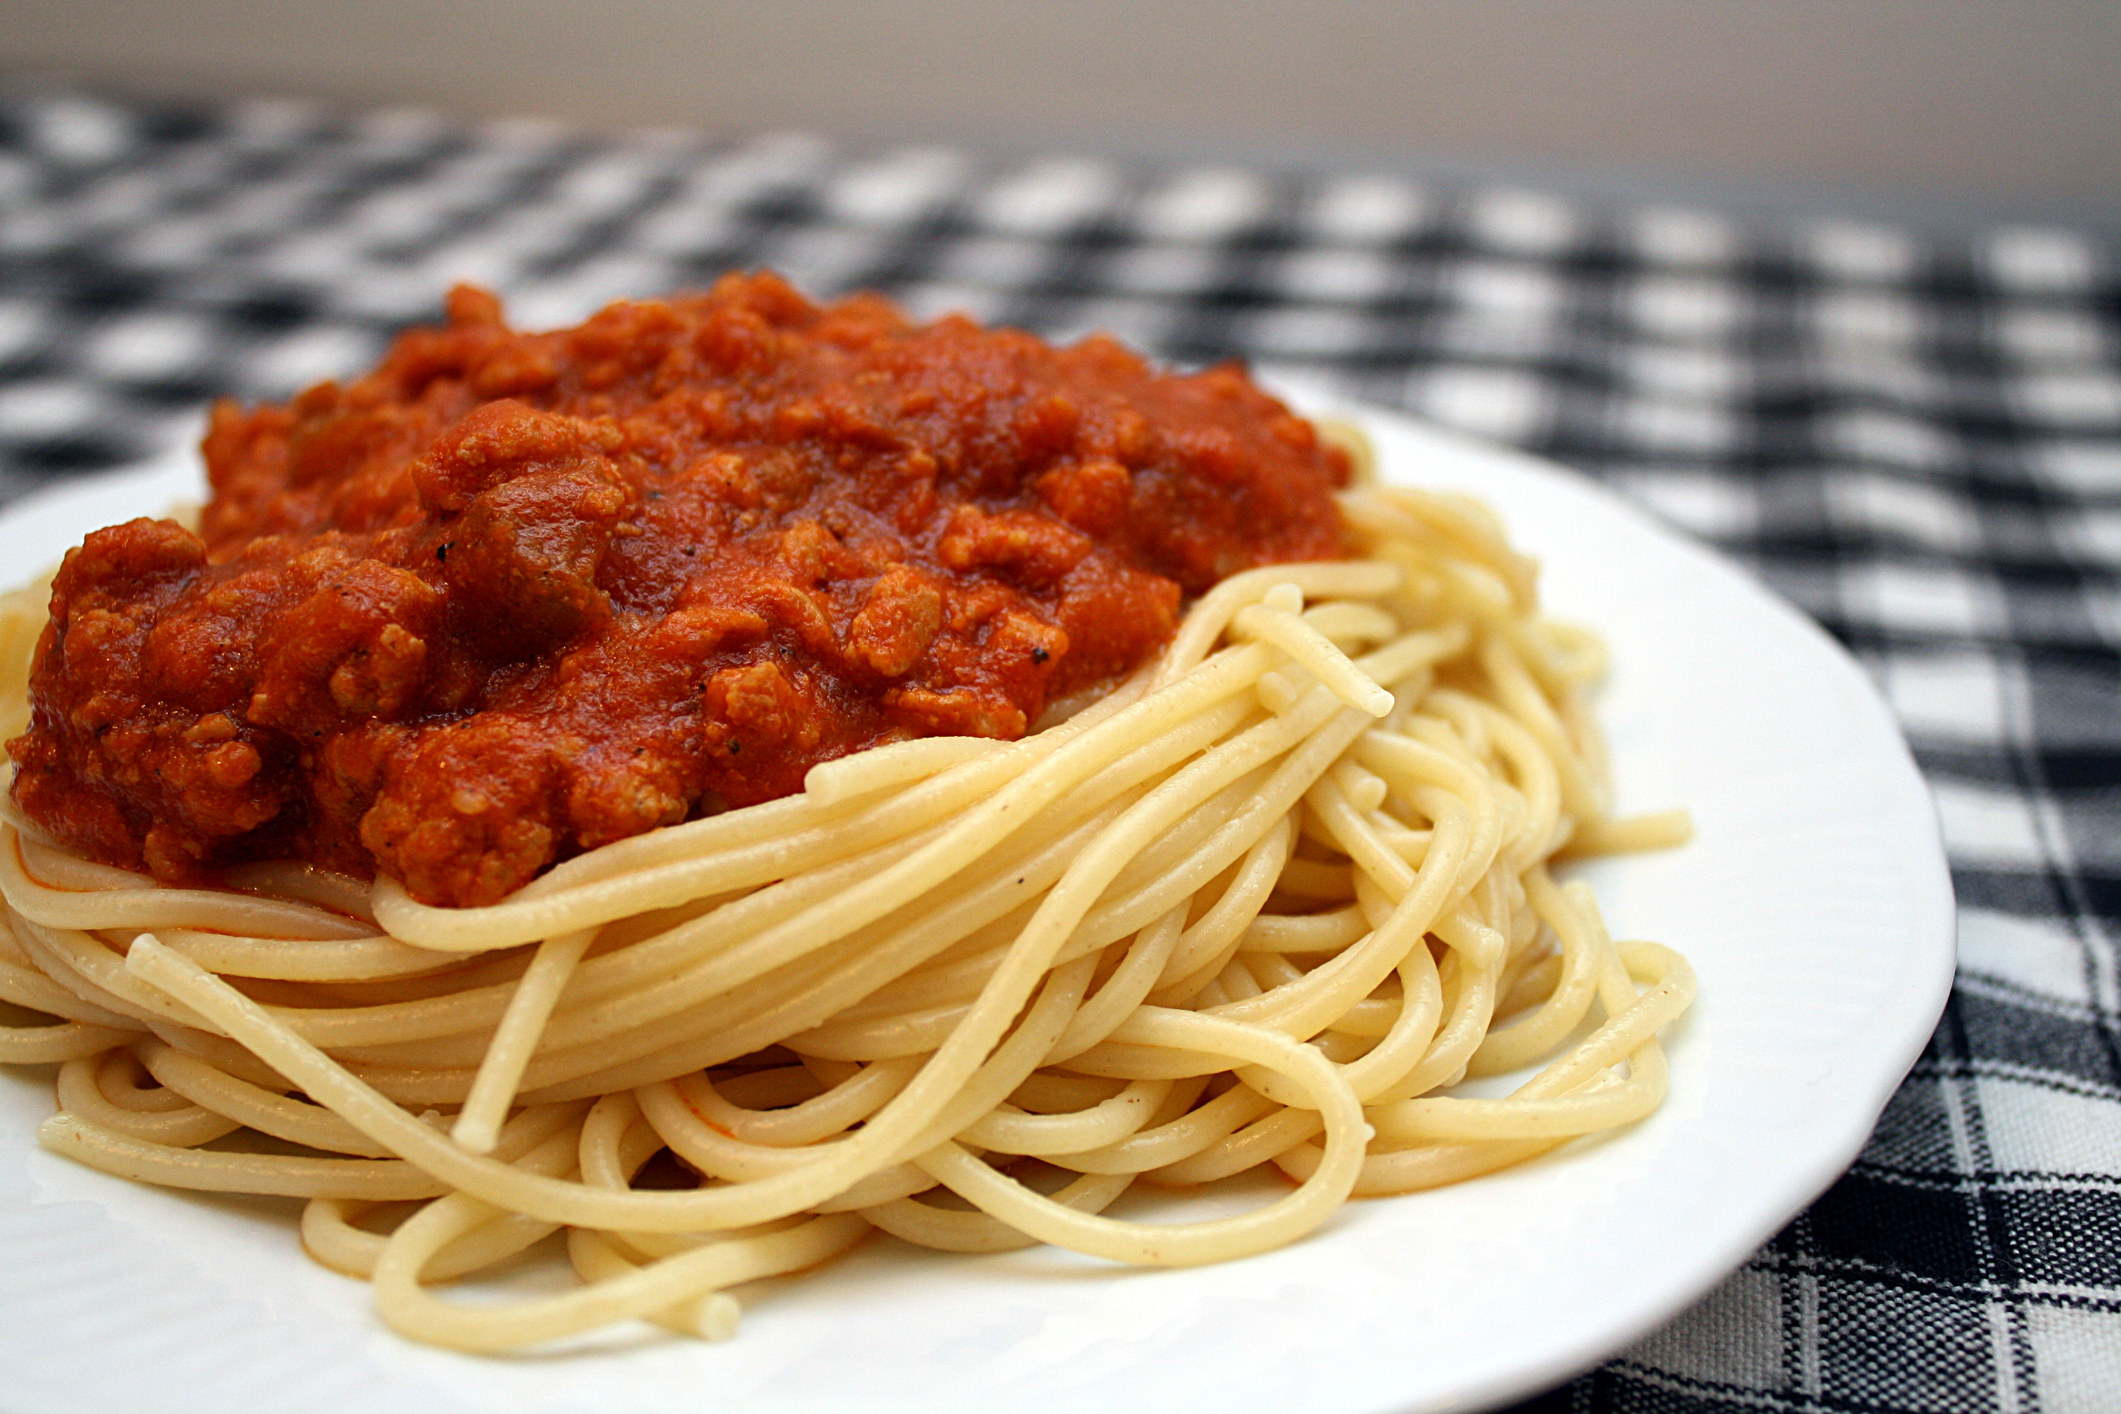 Spaghetti with bolognese sauce.